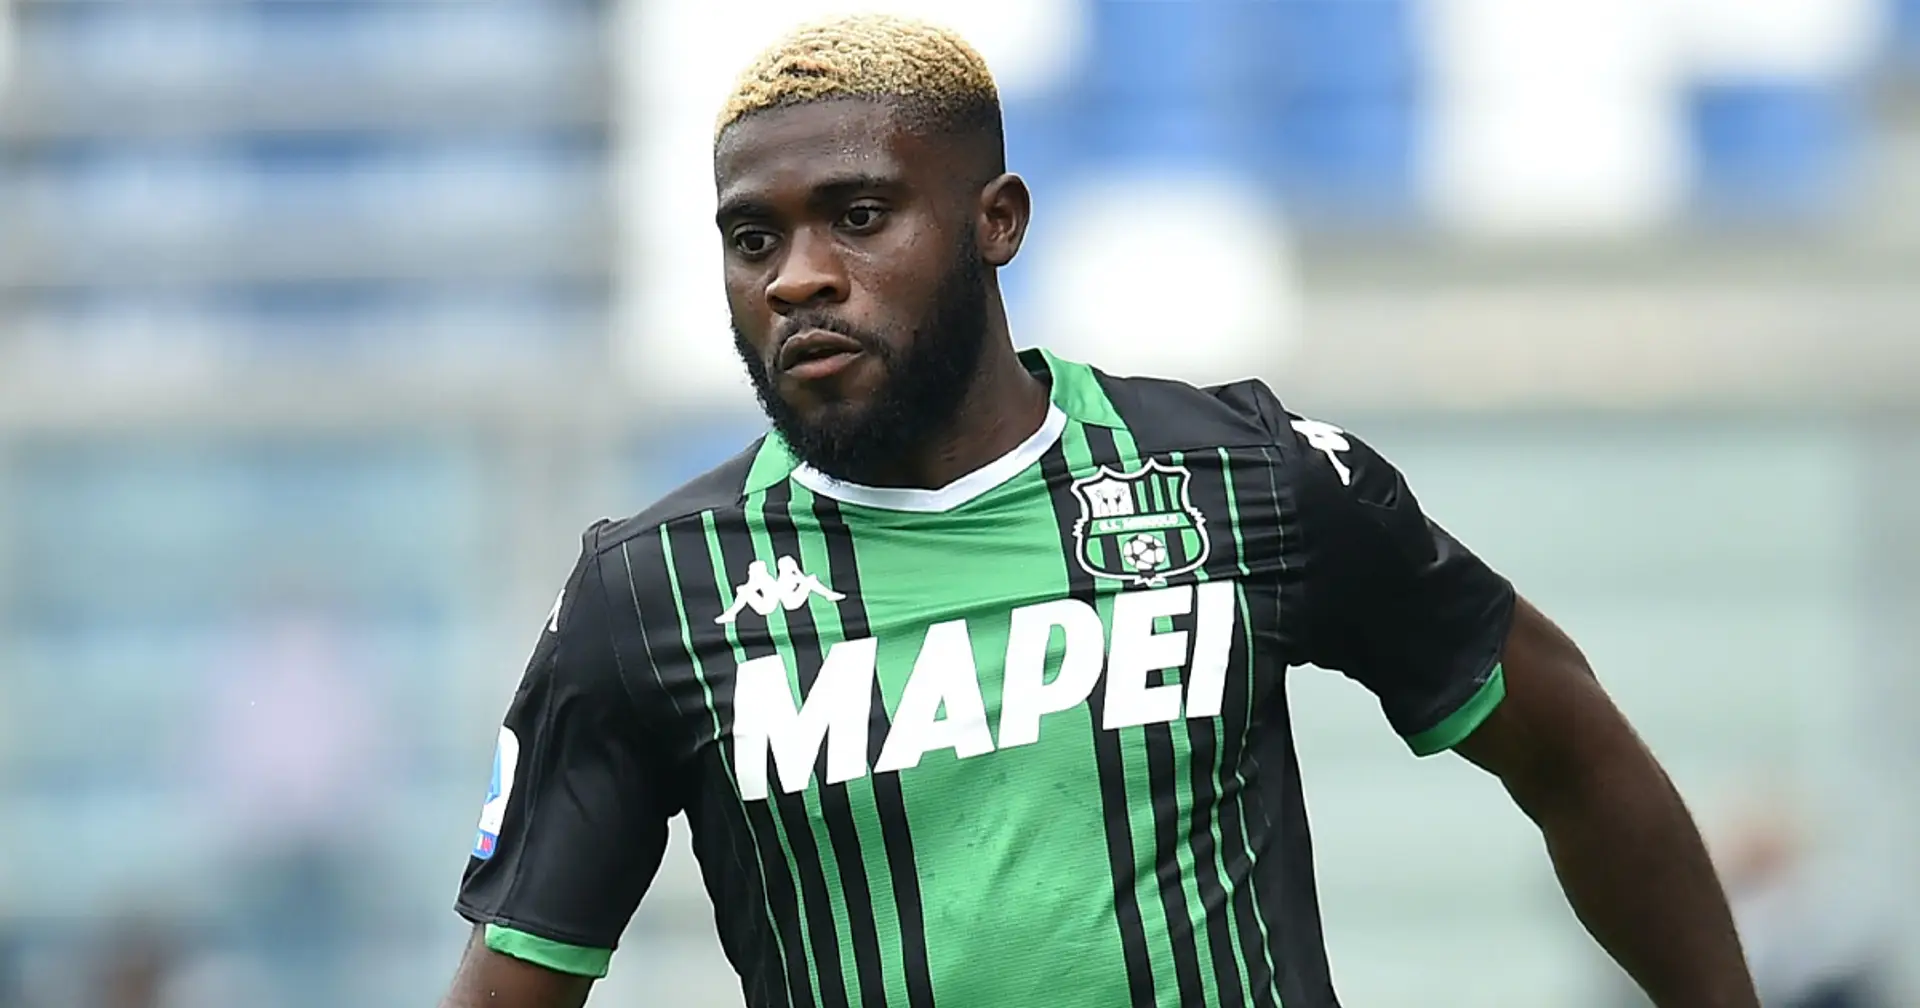 Sassuolo chief confirms Chelsea agreed not to trigger buyback clause for Jeremie Boga